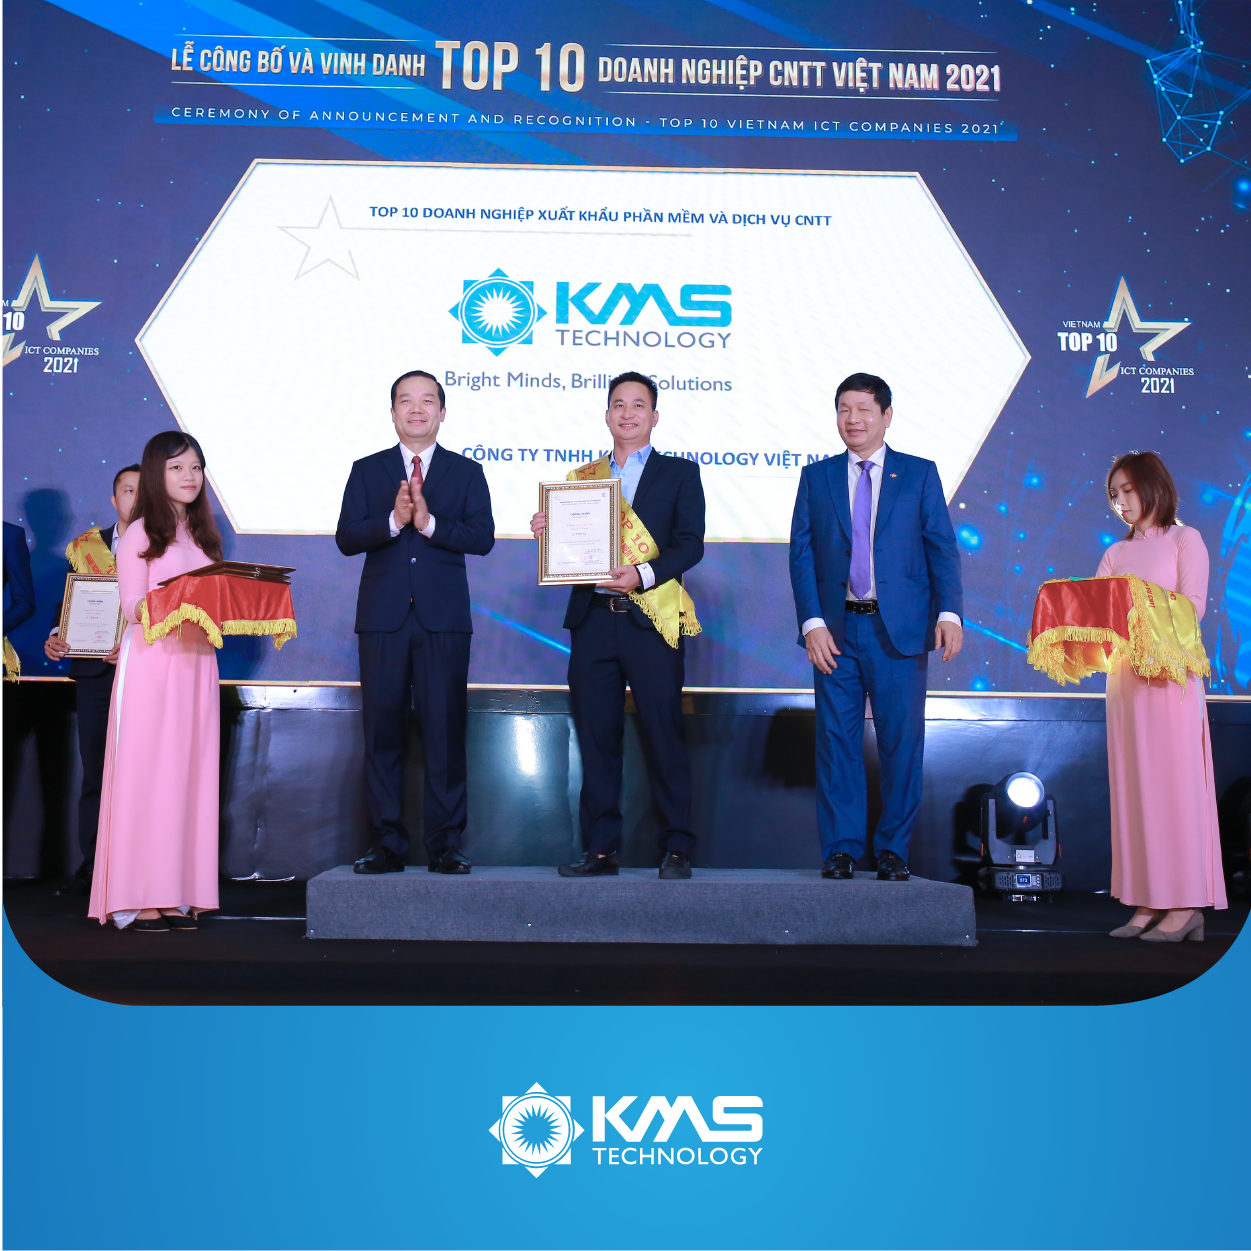 KMS Technology Awarded Top 10 ICT Companies in Vietnam 2021